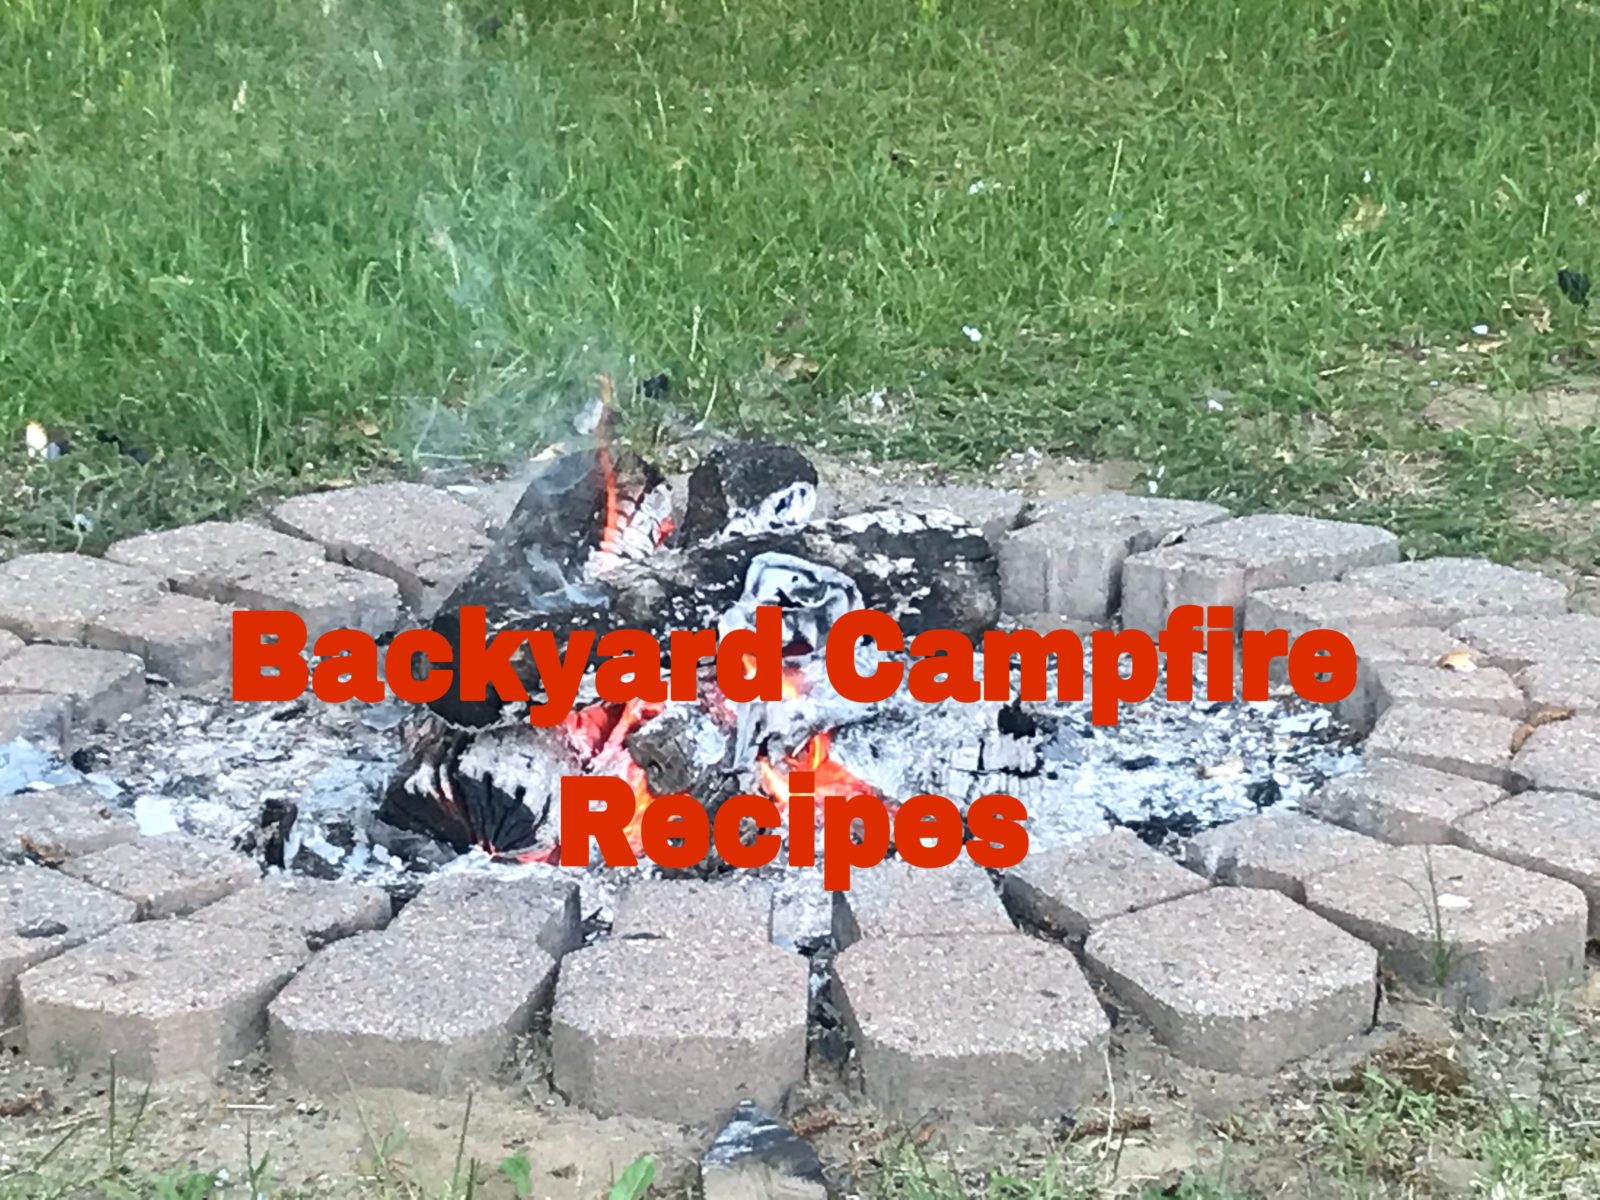 Back yard campfire and grill Recipes